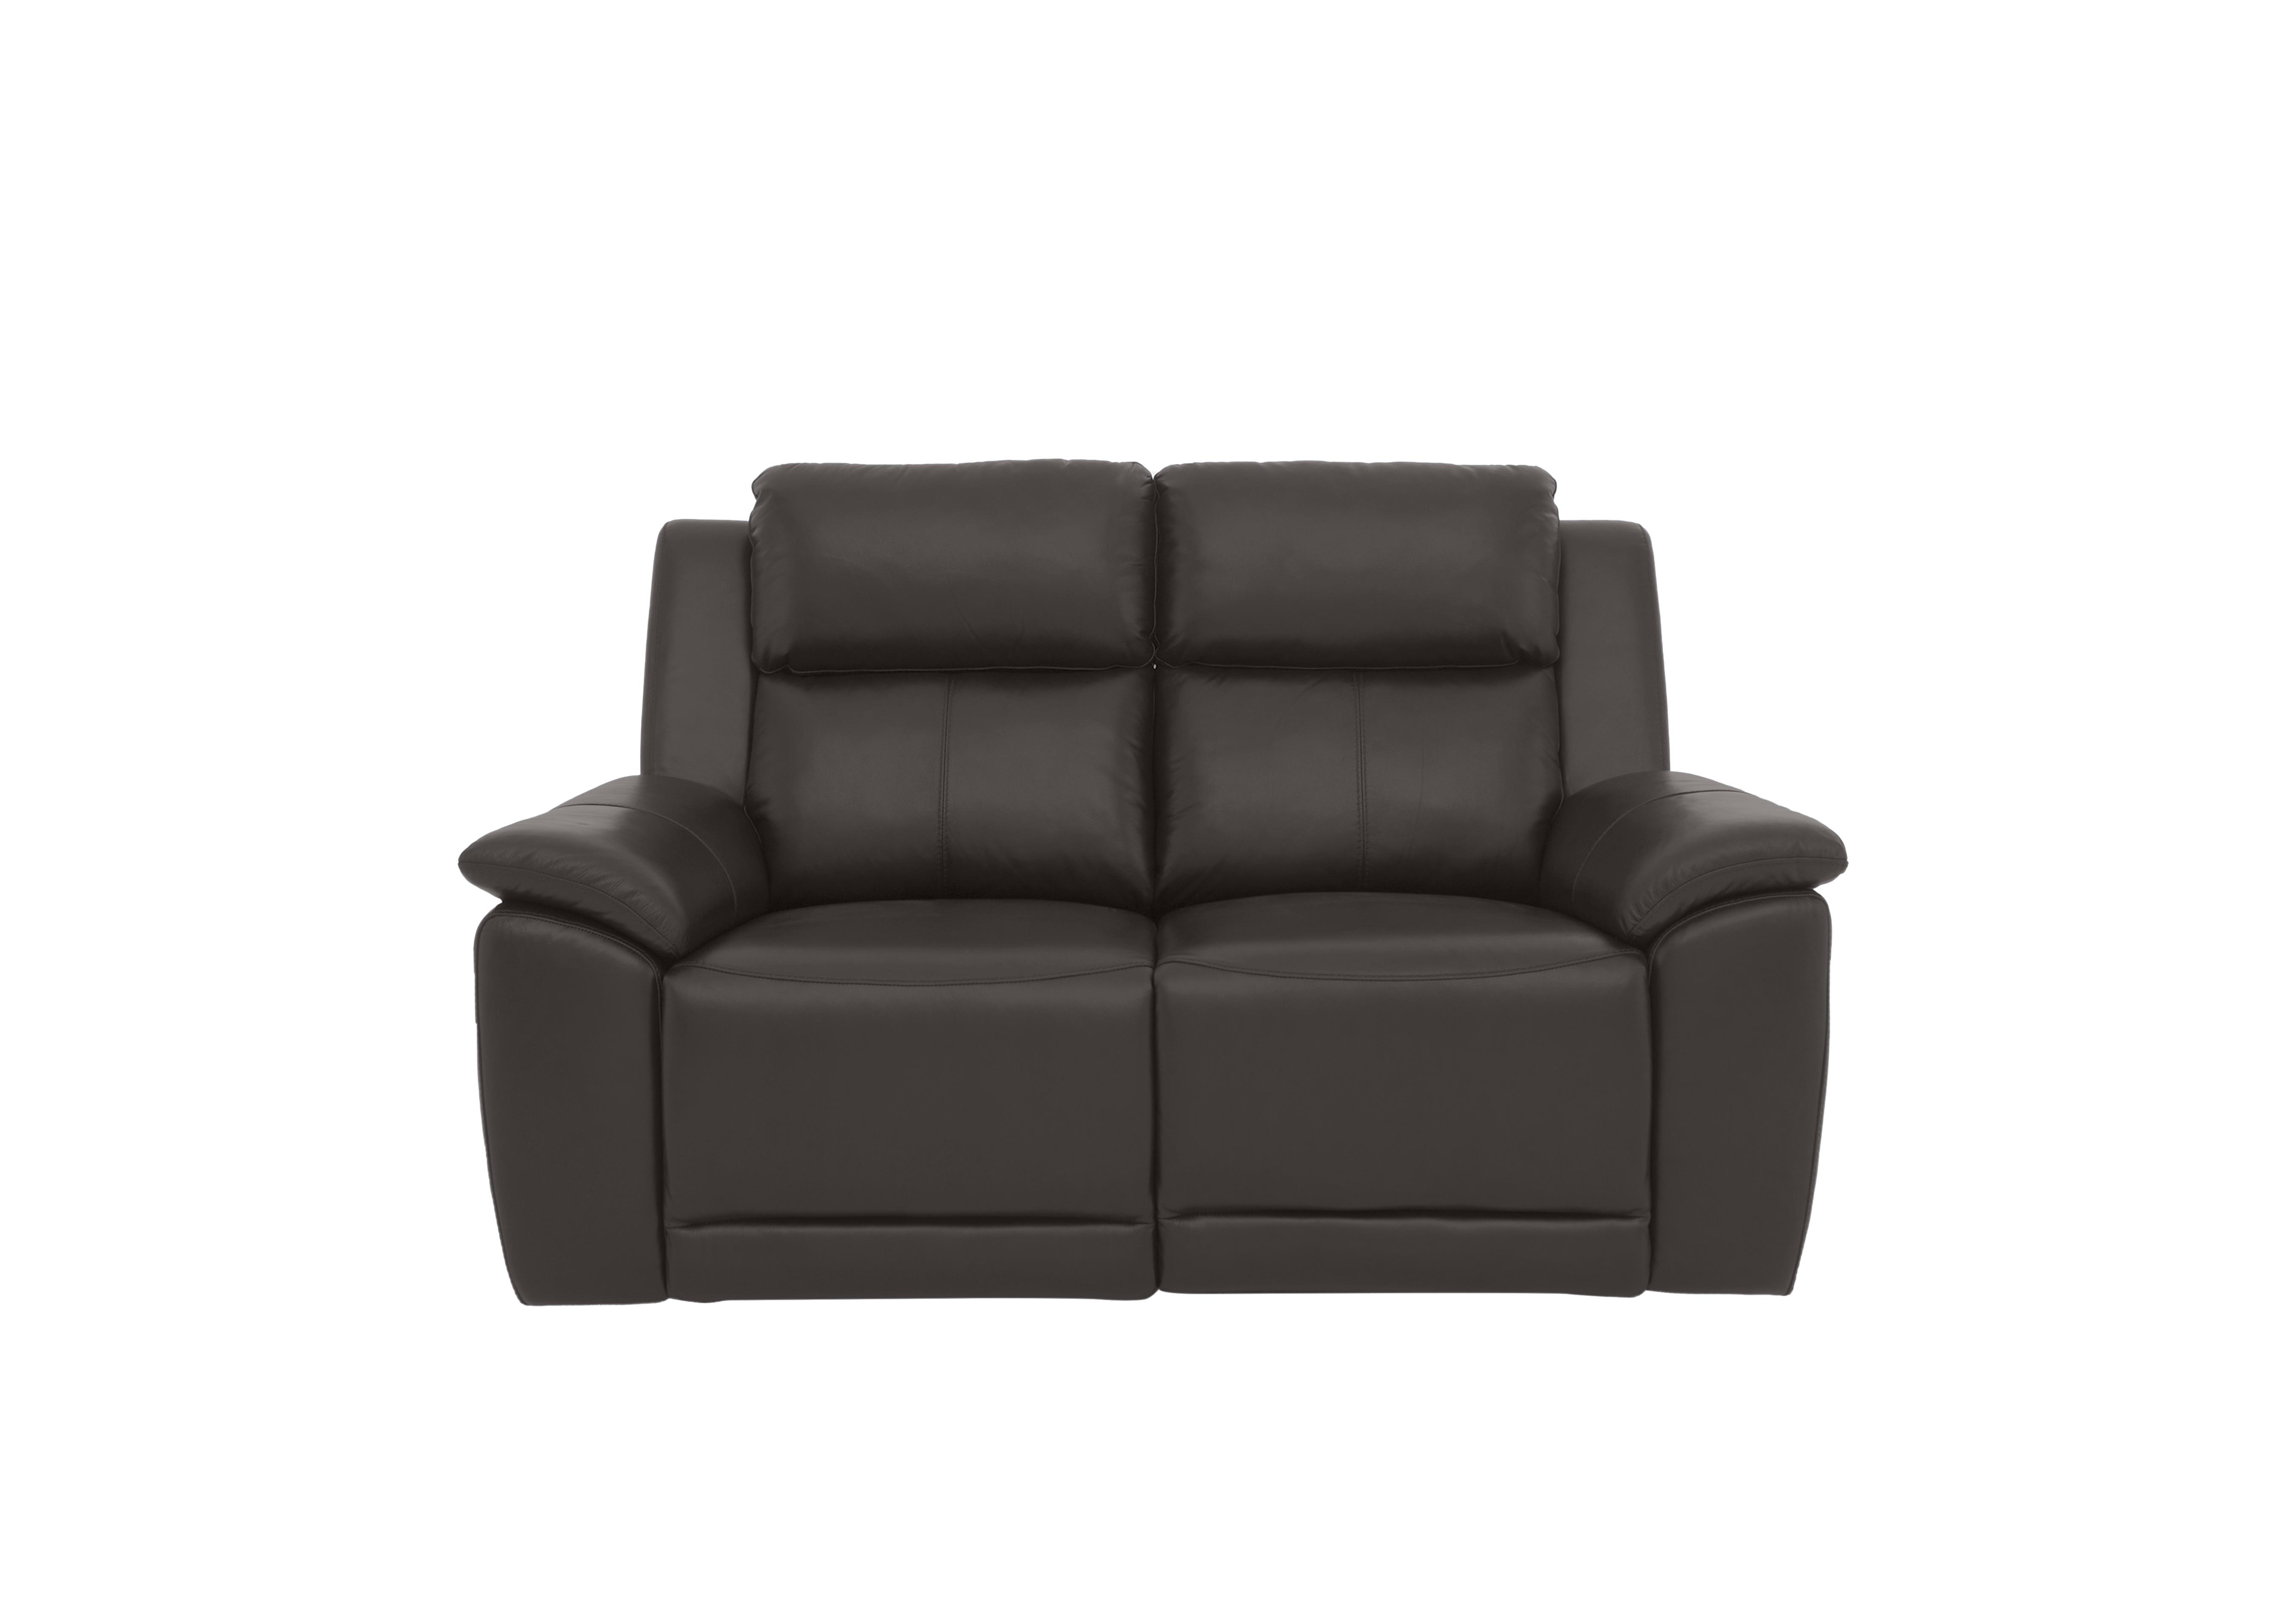 Utah 2 Seater Leather Sofa in Piompo Lx-6404 on Furniture Village